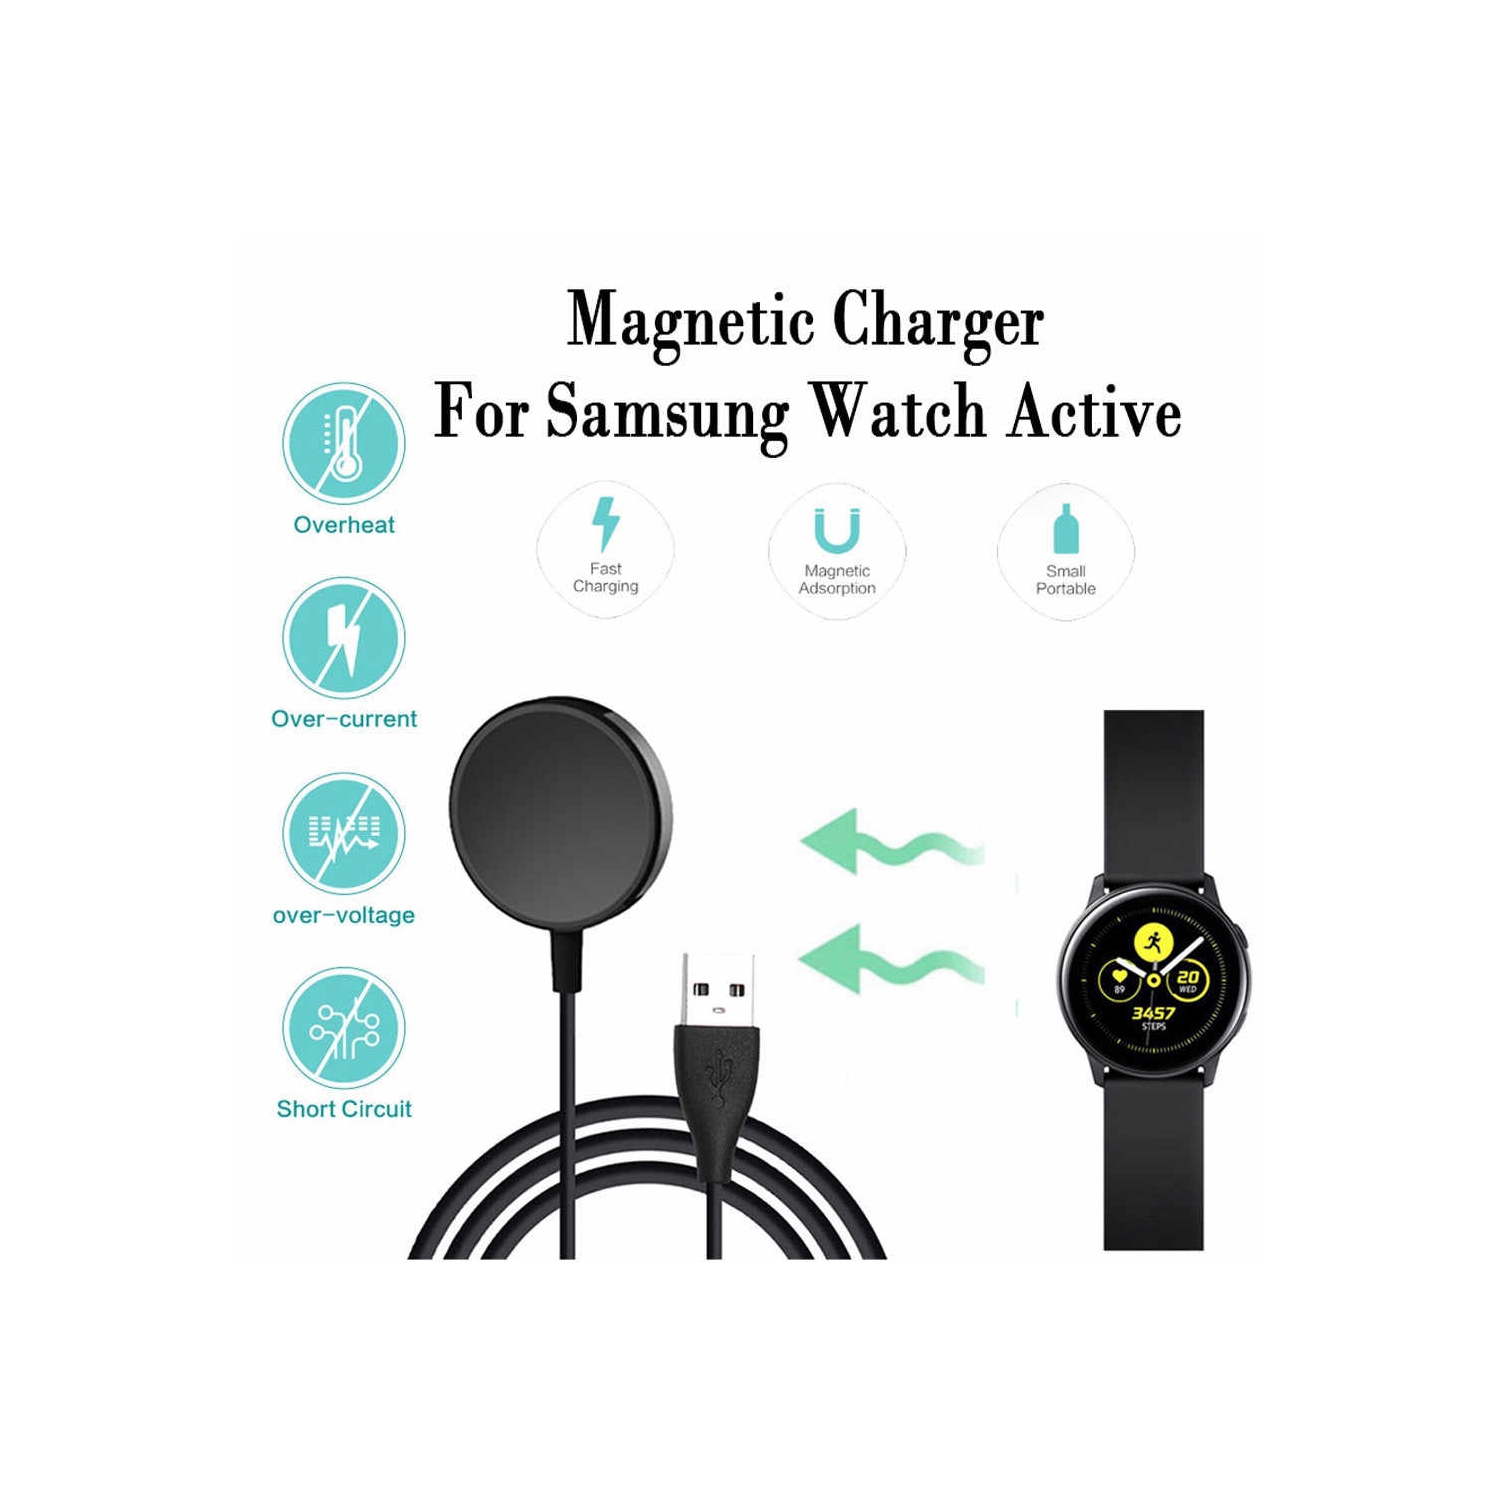 Wireless Magnetic Fast Charging Dock Smart Watch Charger Cable for Samsung Galaxy Watch Active 1 2, Black